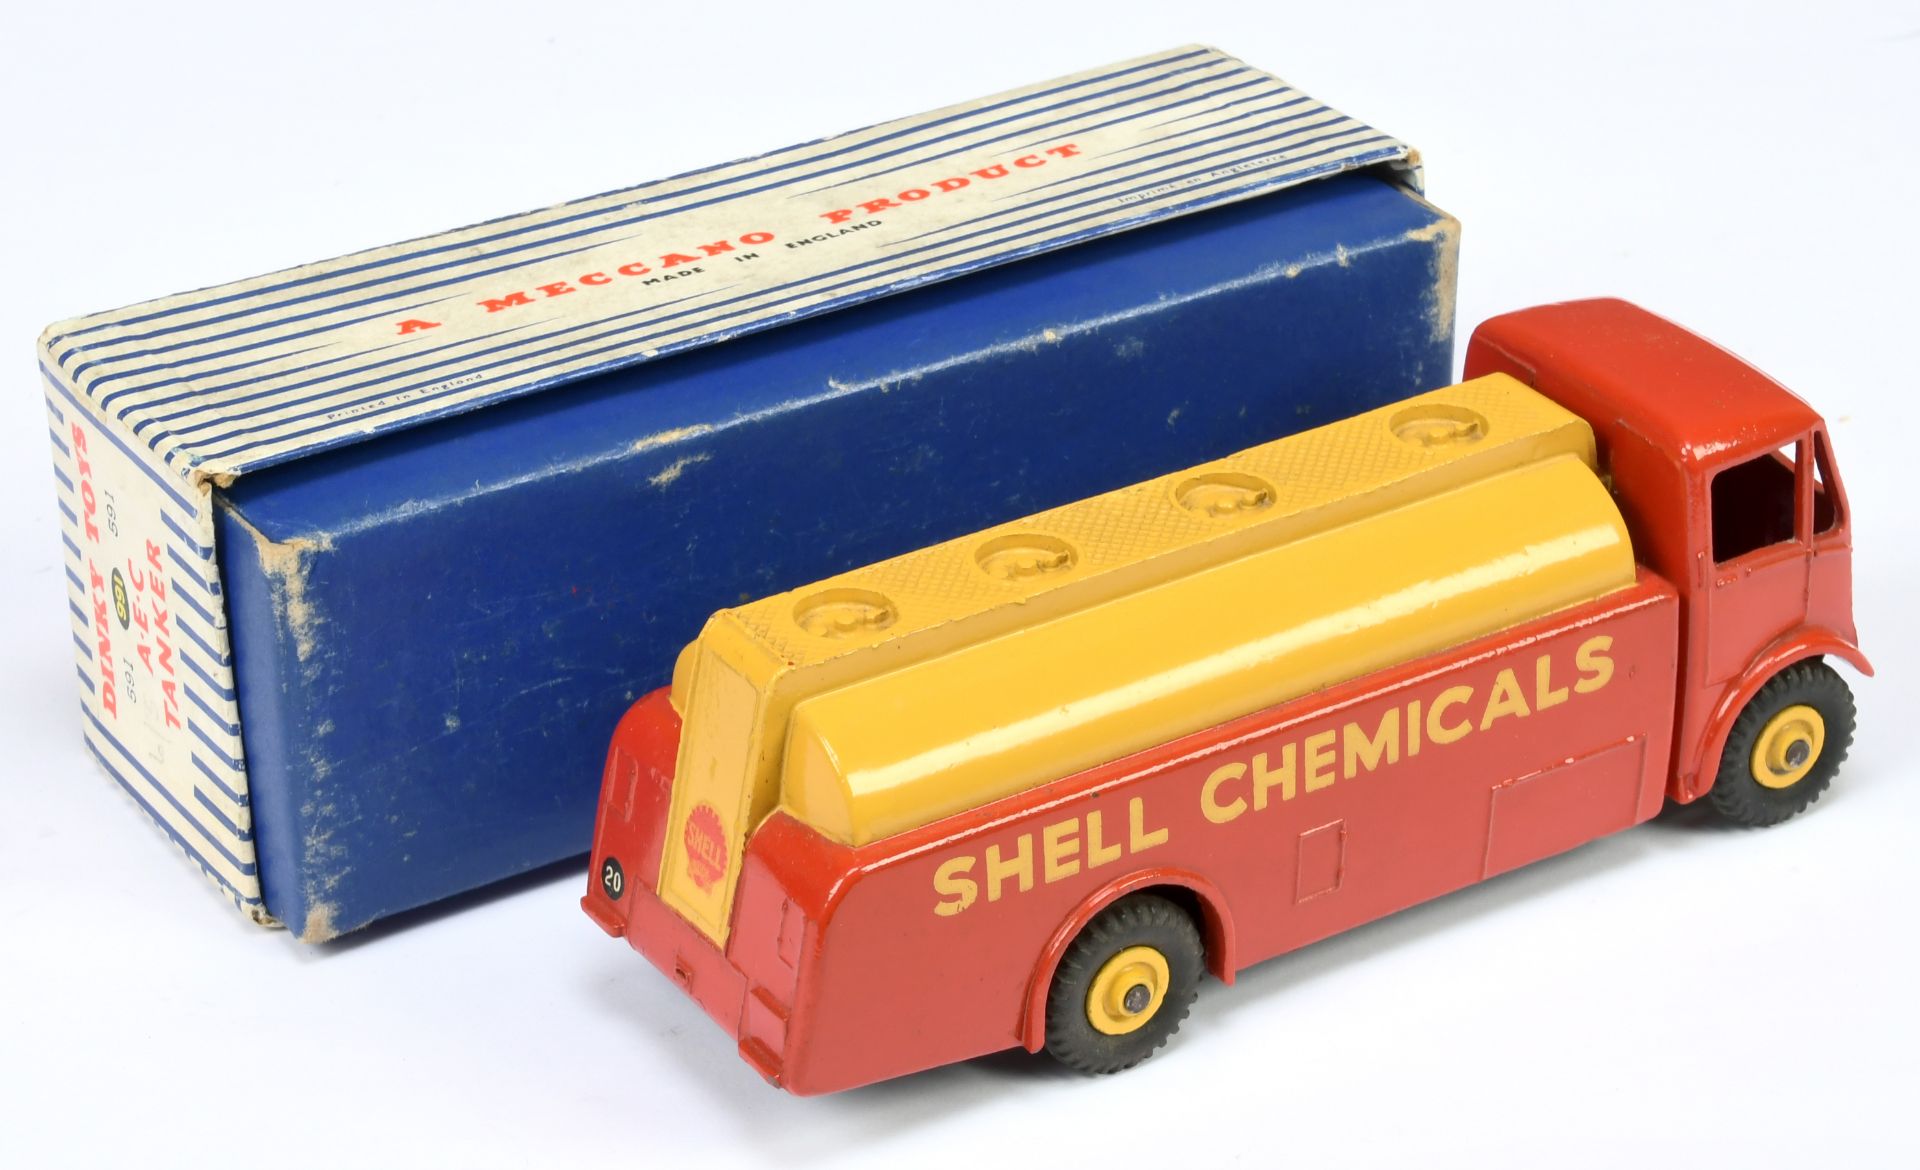 Dinky Toys 991 (591) AEC Monarch Thompson Tanker " Shell Chemicals" - Red cab and back, yellow ta... - Image 2 of 2